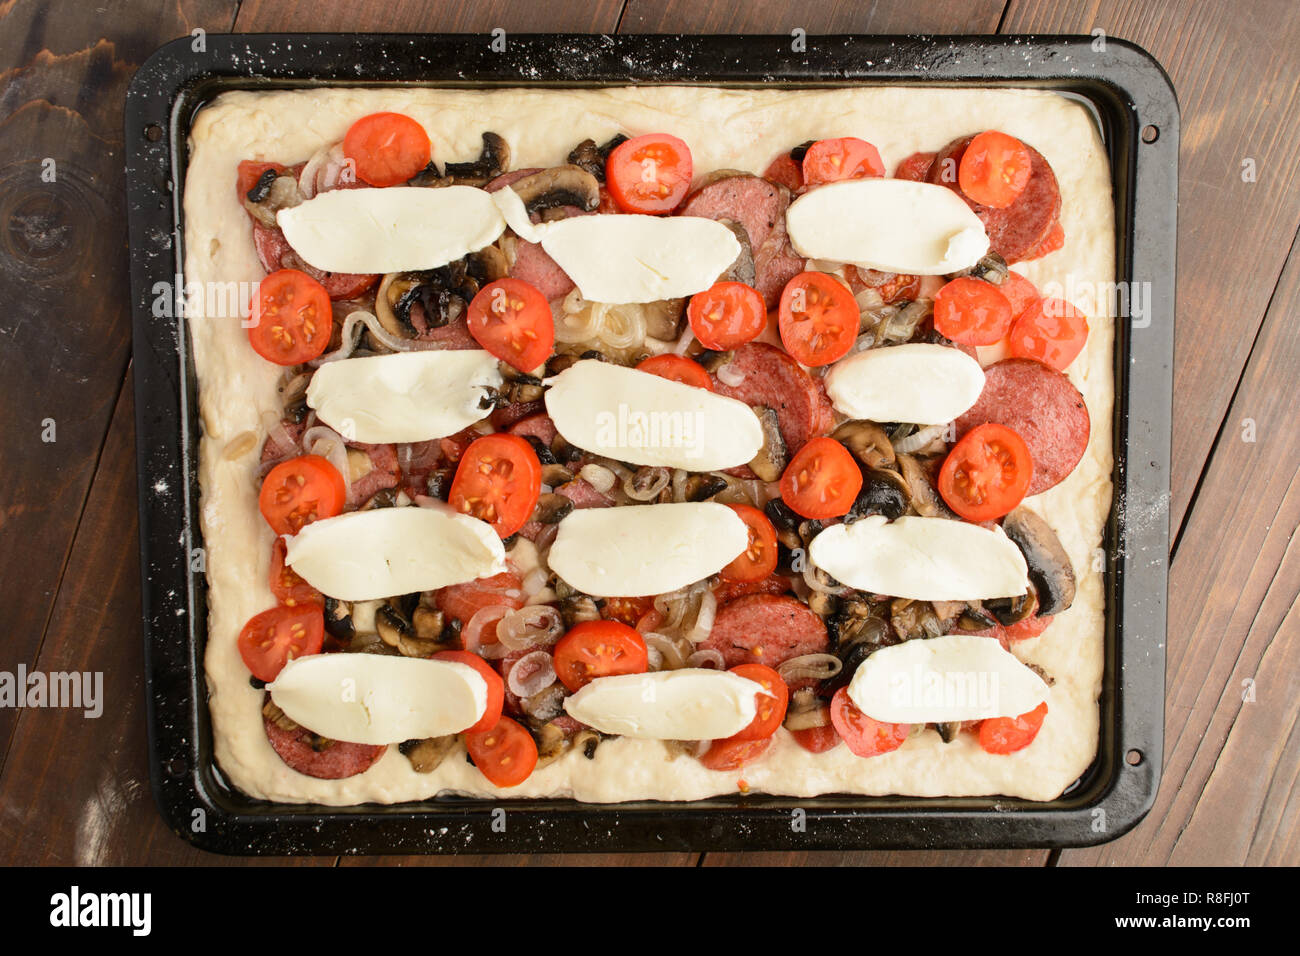 Unready homemade pizza with ingredients on baking pan over brown wooden background Stock Photo